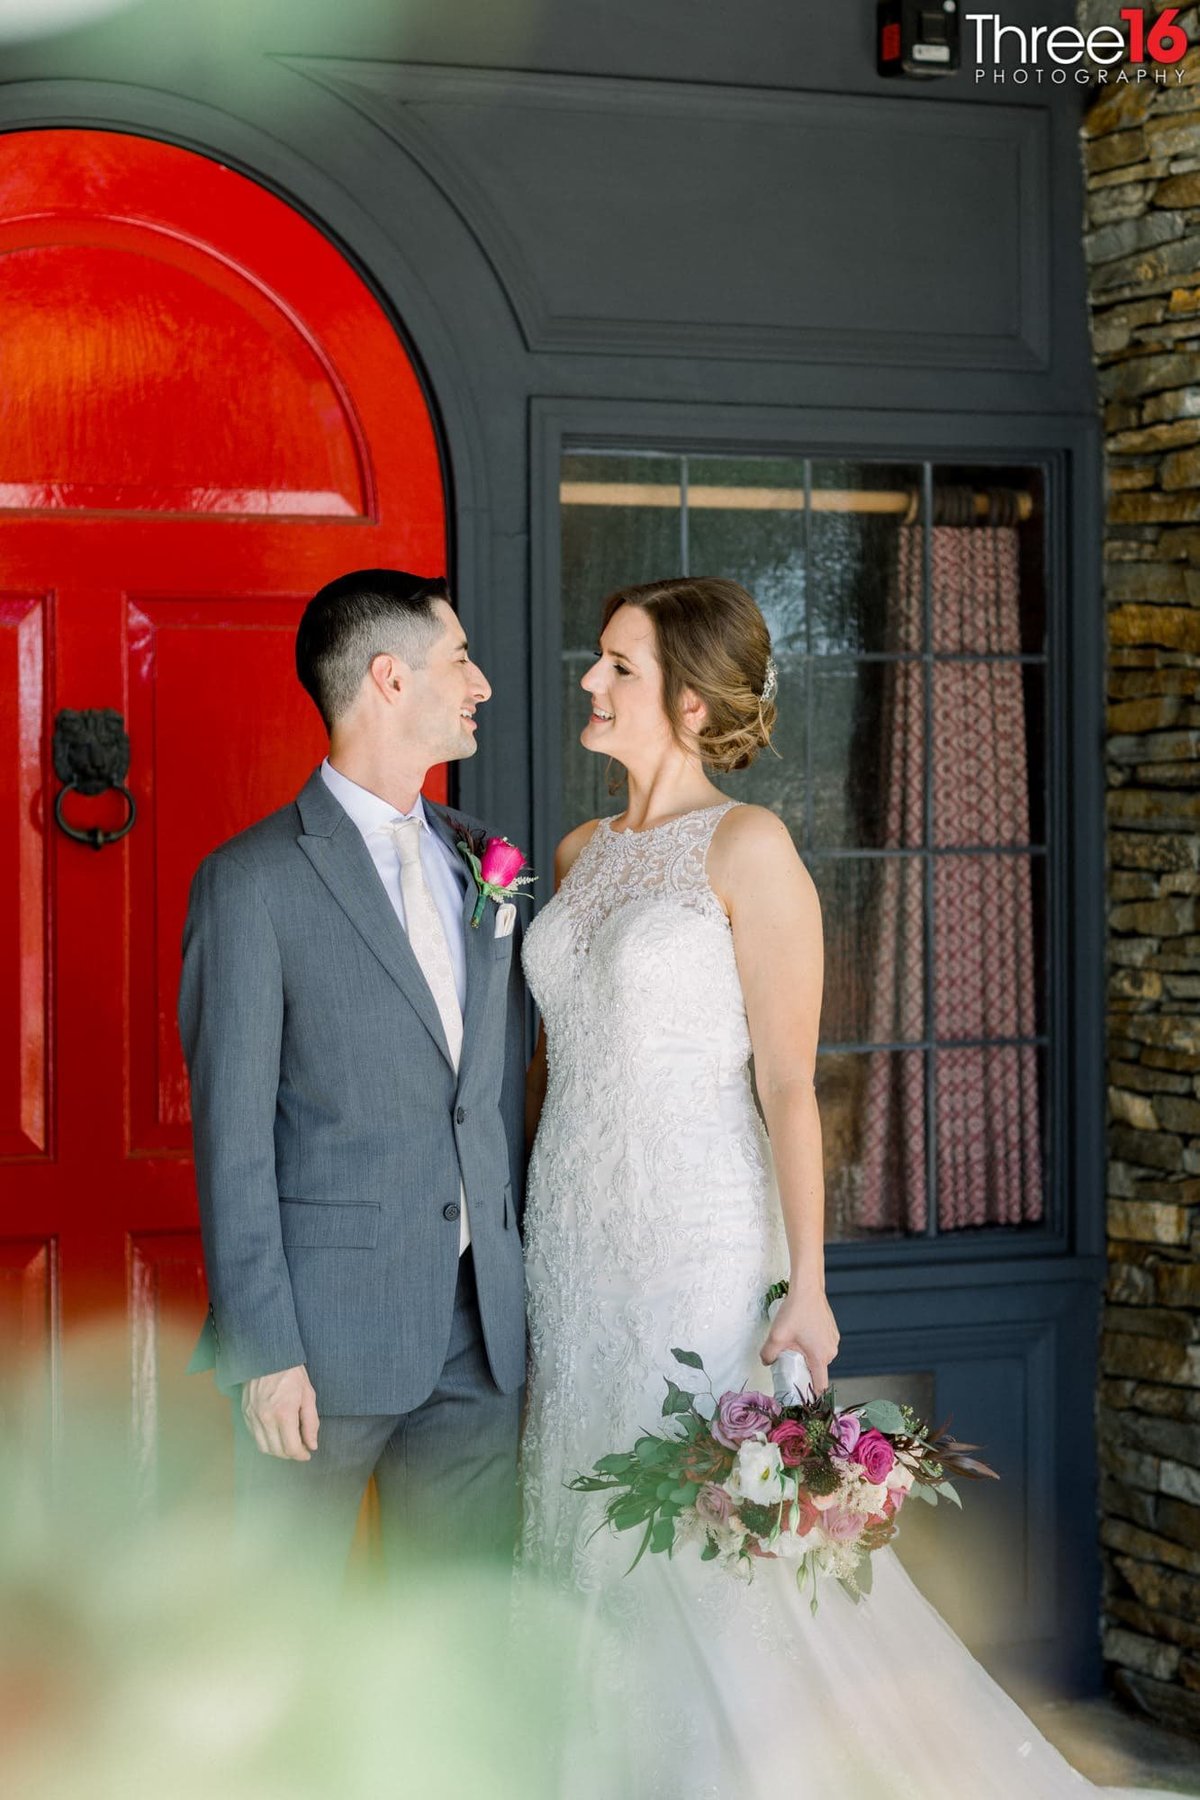 Bride and Groom stop to look at each other in front of the red door entrance to the Summit House Restaurant